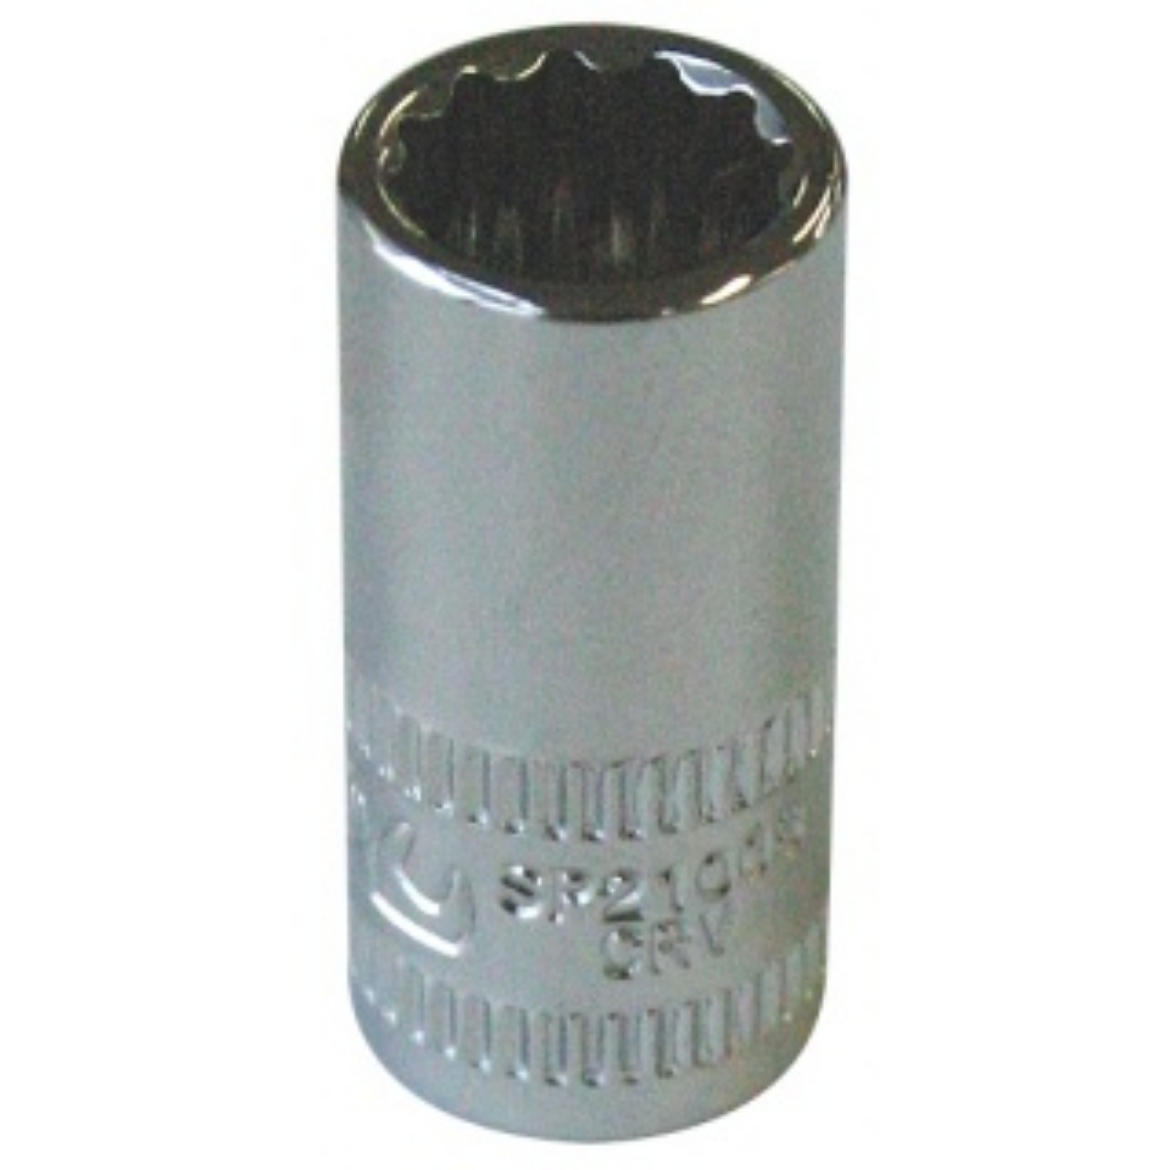 Picture of SOCKET 1/4"DR 12 PT METRIC 11MM SP TOOLS